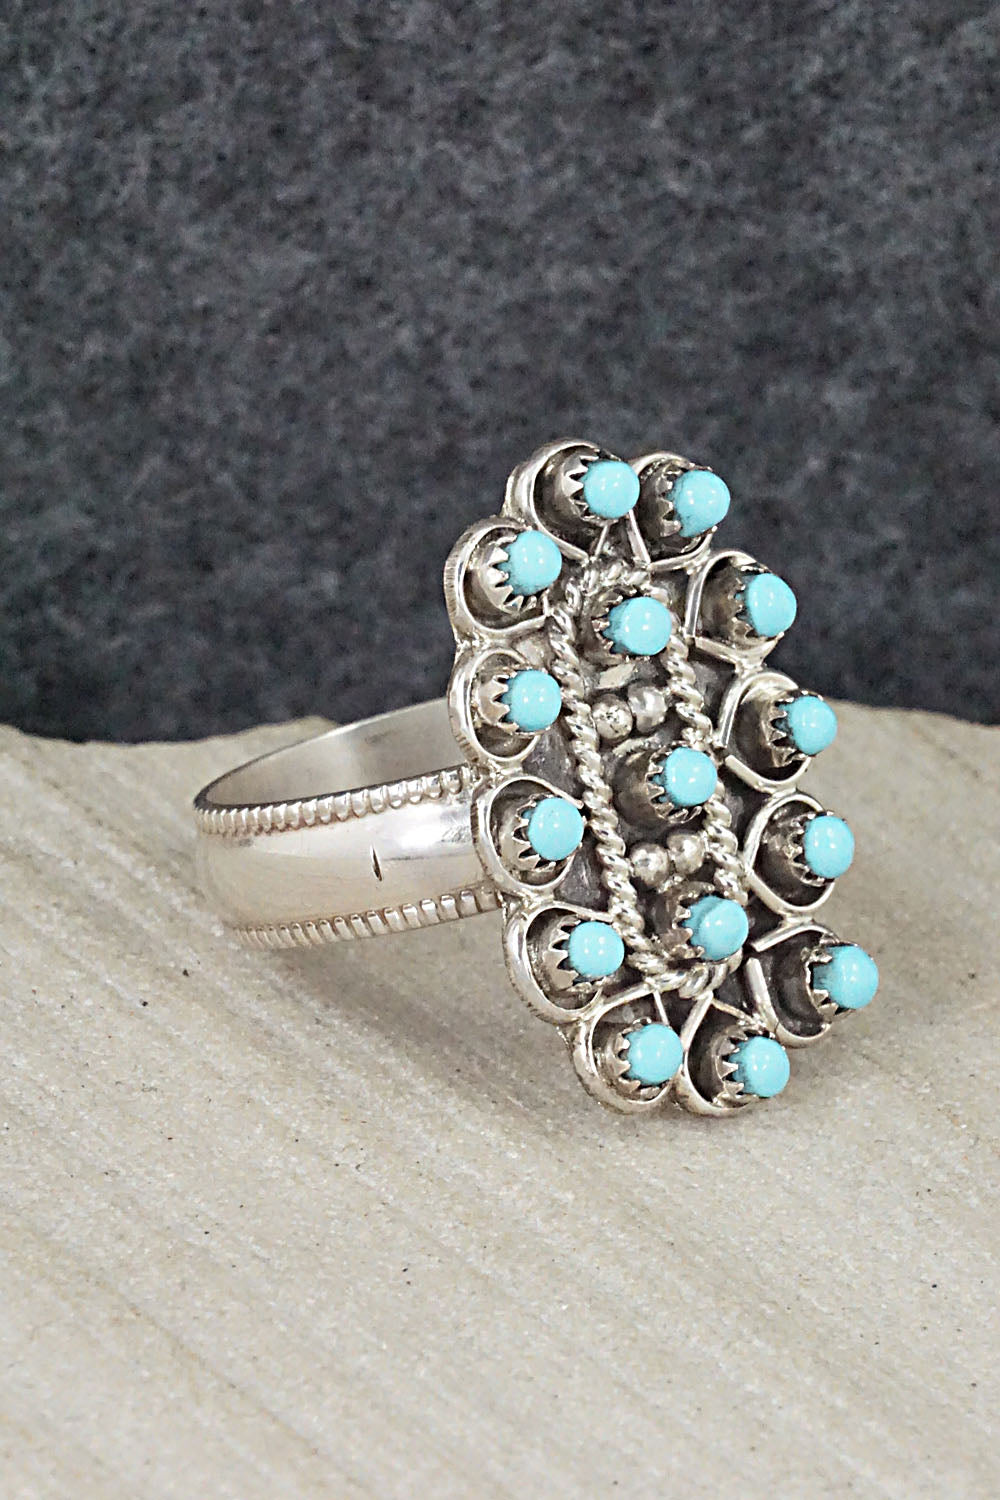 Turquoise & Sterling Silver Ring - Wayne Johnson - Size 9.25